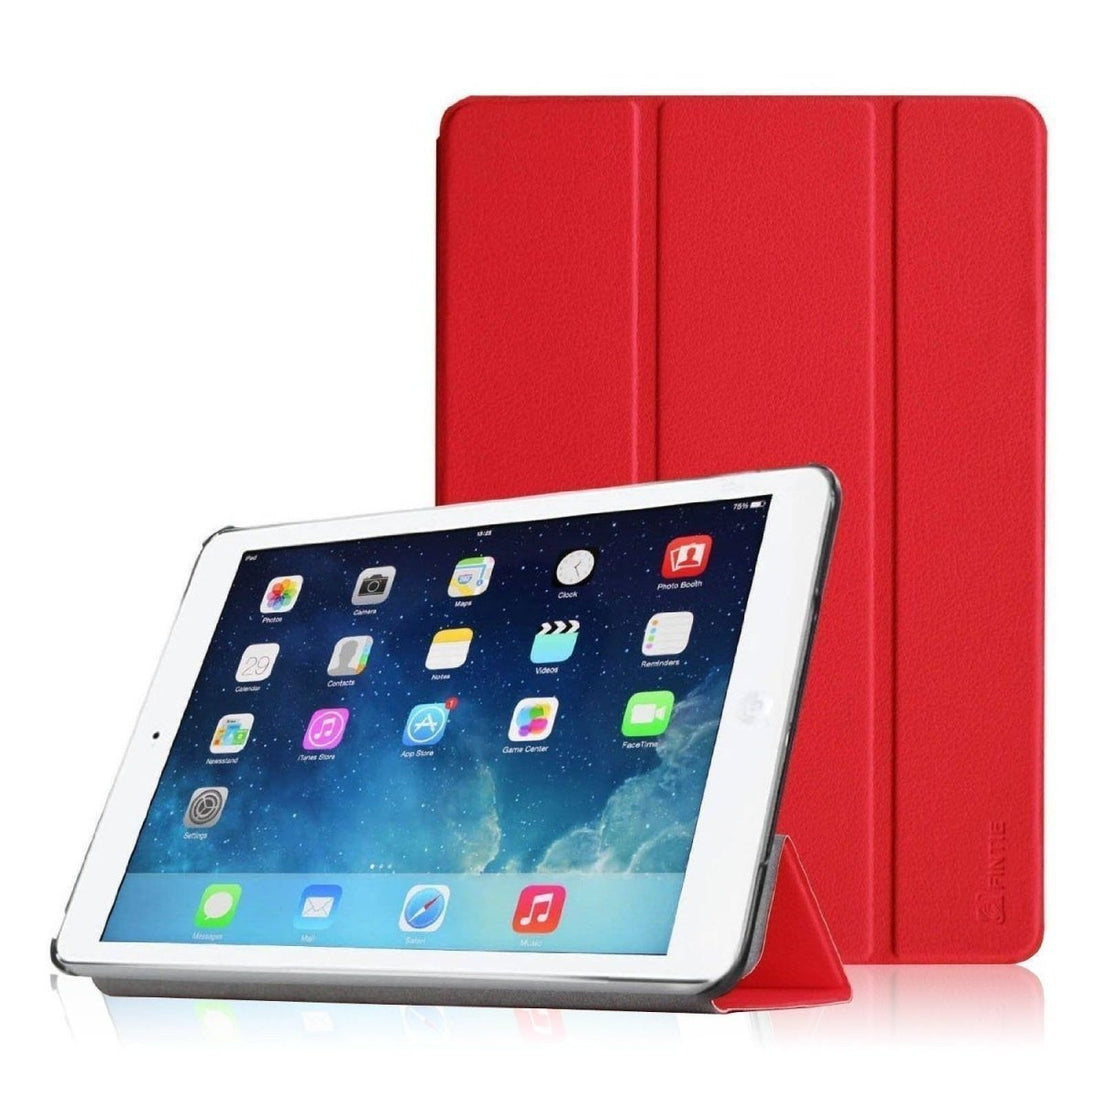 Maximum quality and greater protection for your iPad Air 2! - Moarmouz